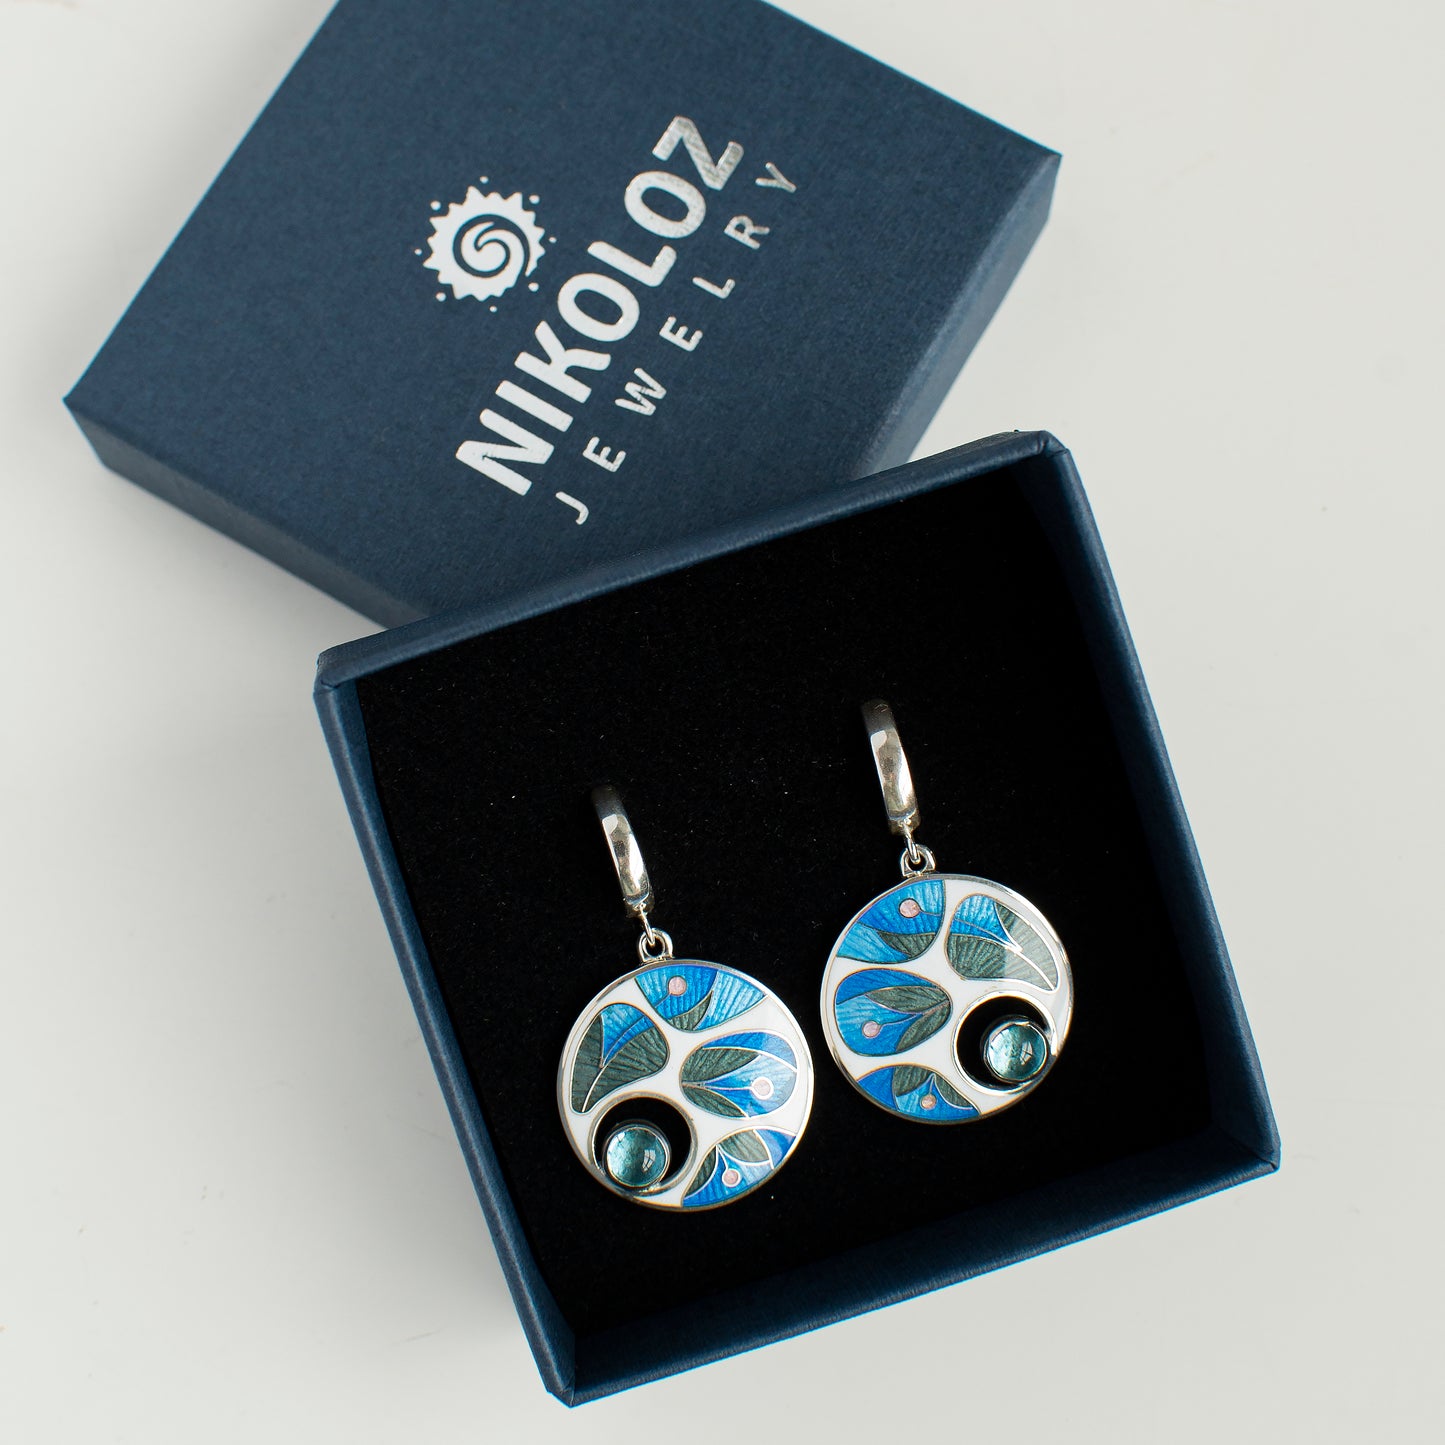 Cloisonné Enamel And Sterling Silver Earrings With Topaz Gemstones